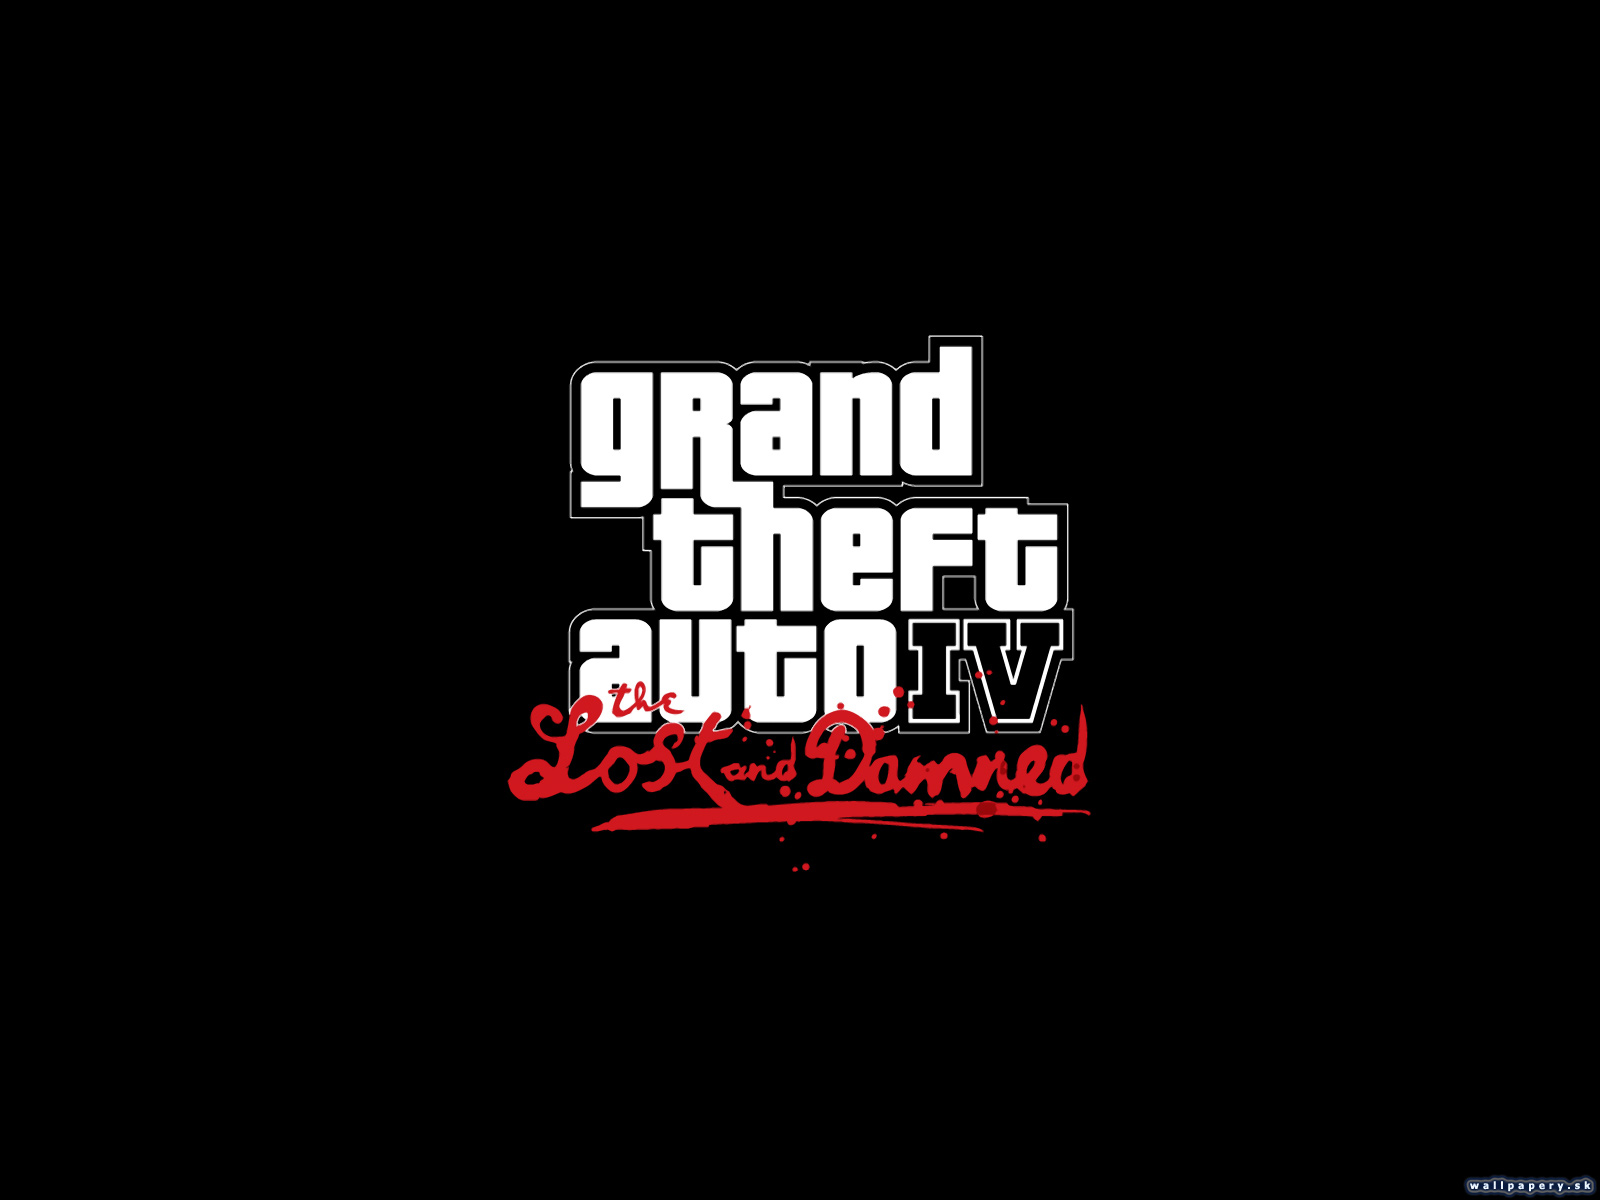 Grand Theft Auto IV: The Lost and Damned - wallpaper 10